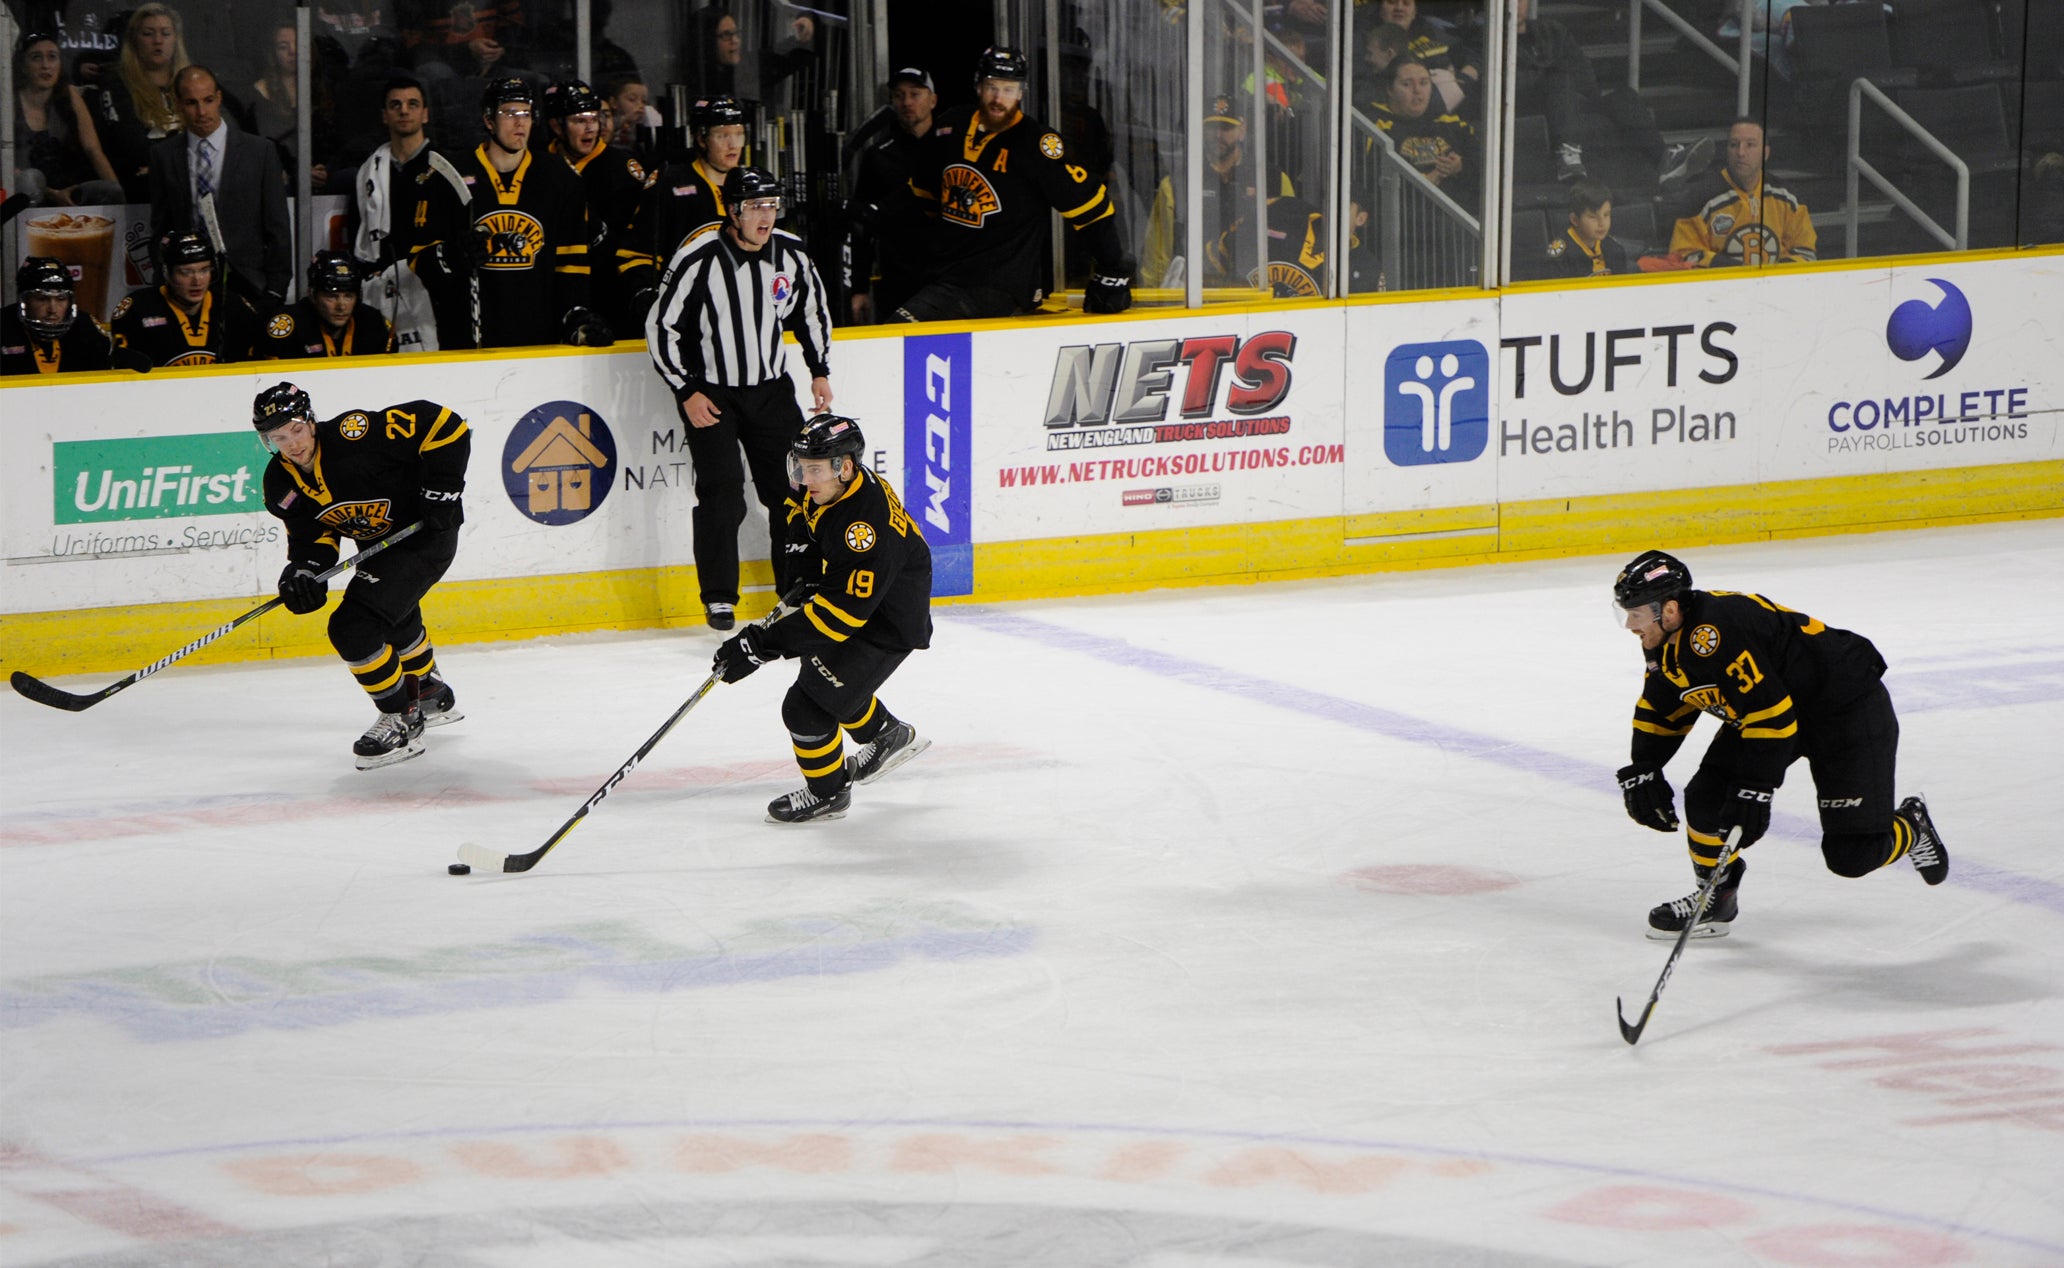 P-BRUINS SEASON REVIEW: TOP LINE LEADS THE WAY | Providence Bruins